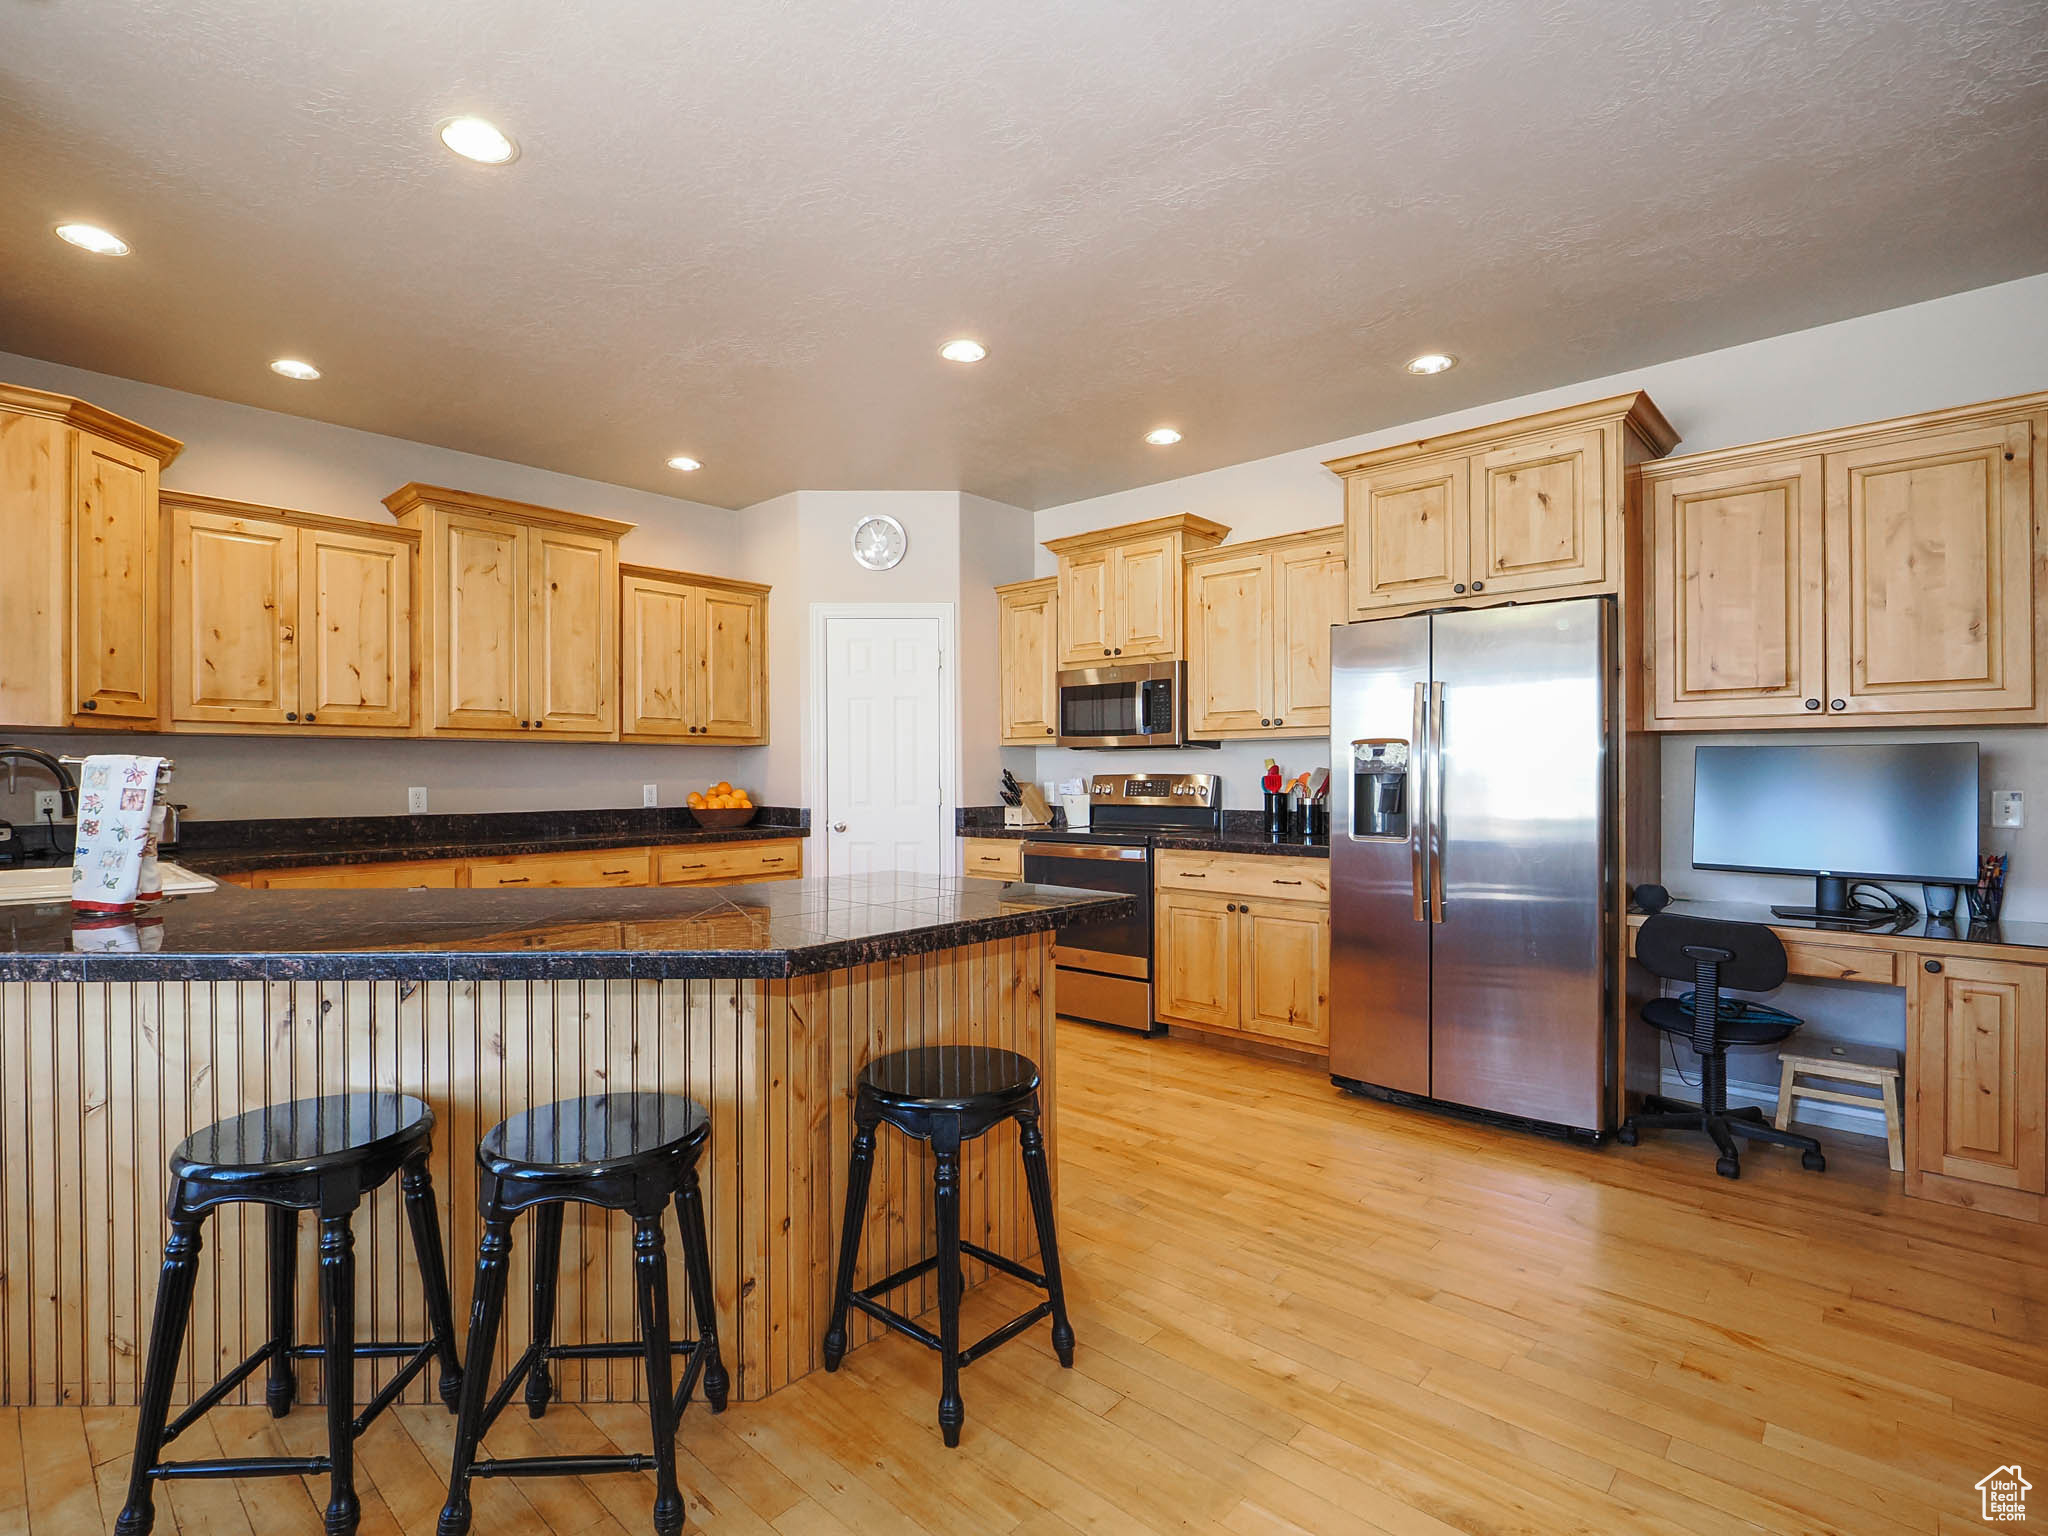 Kitchen with appliances with stainless steel finishes, light hardwood flooring, a breakfast bar area